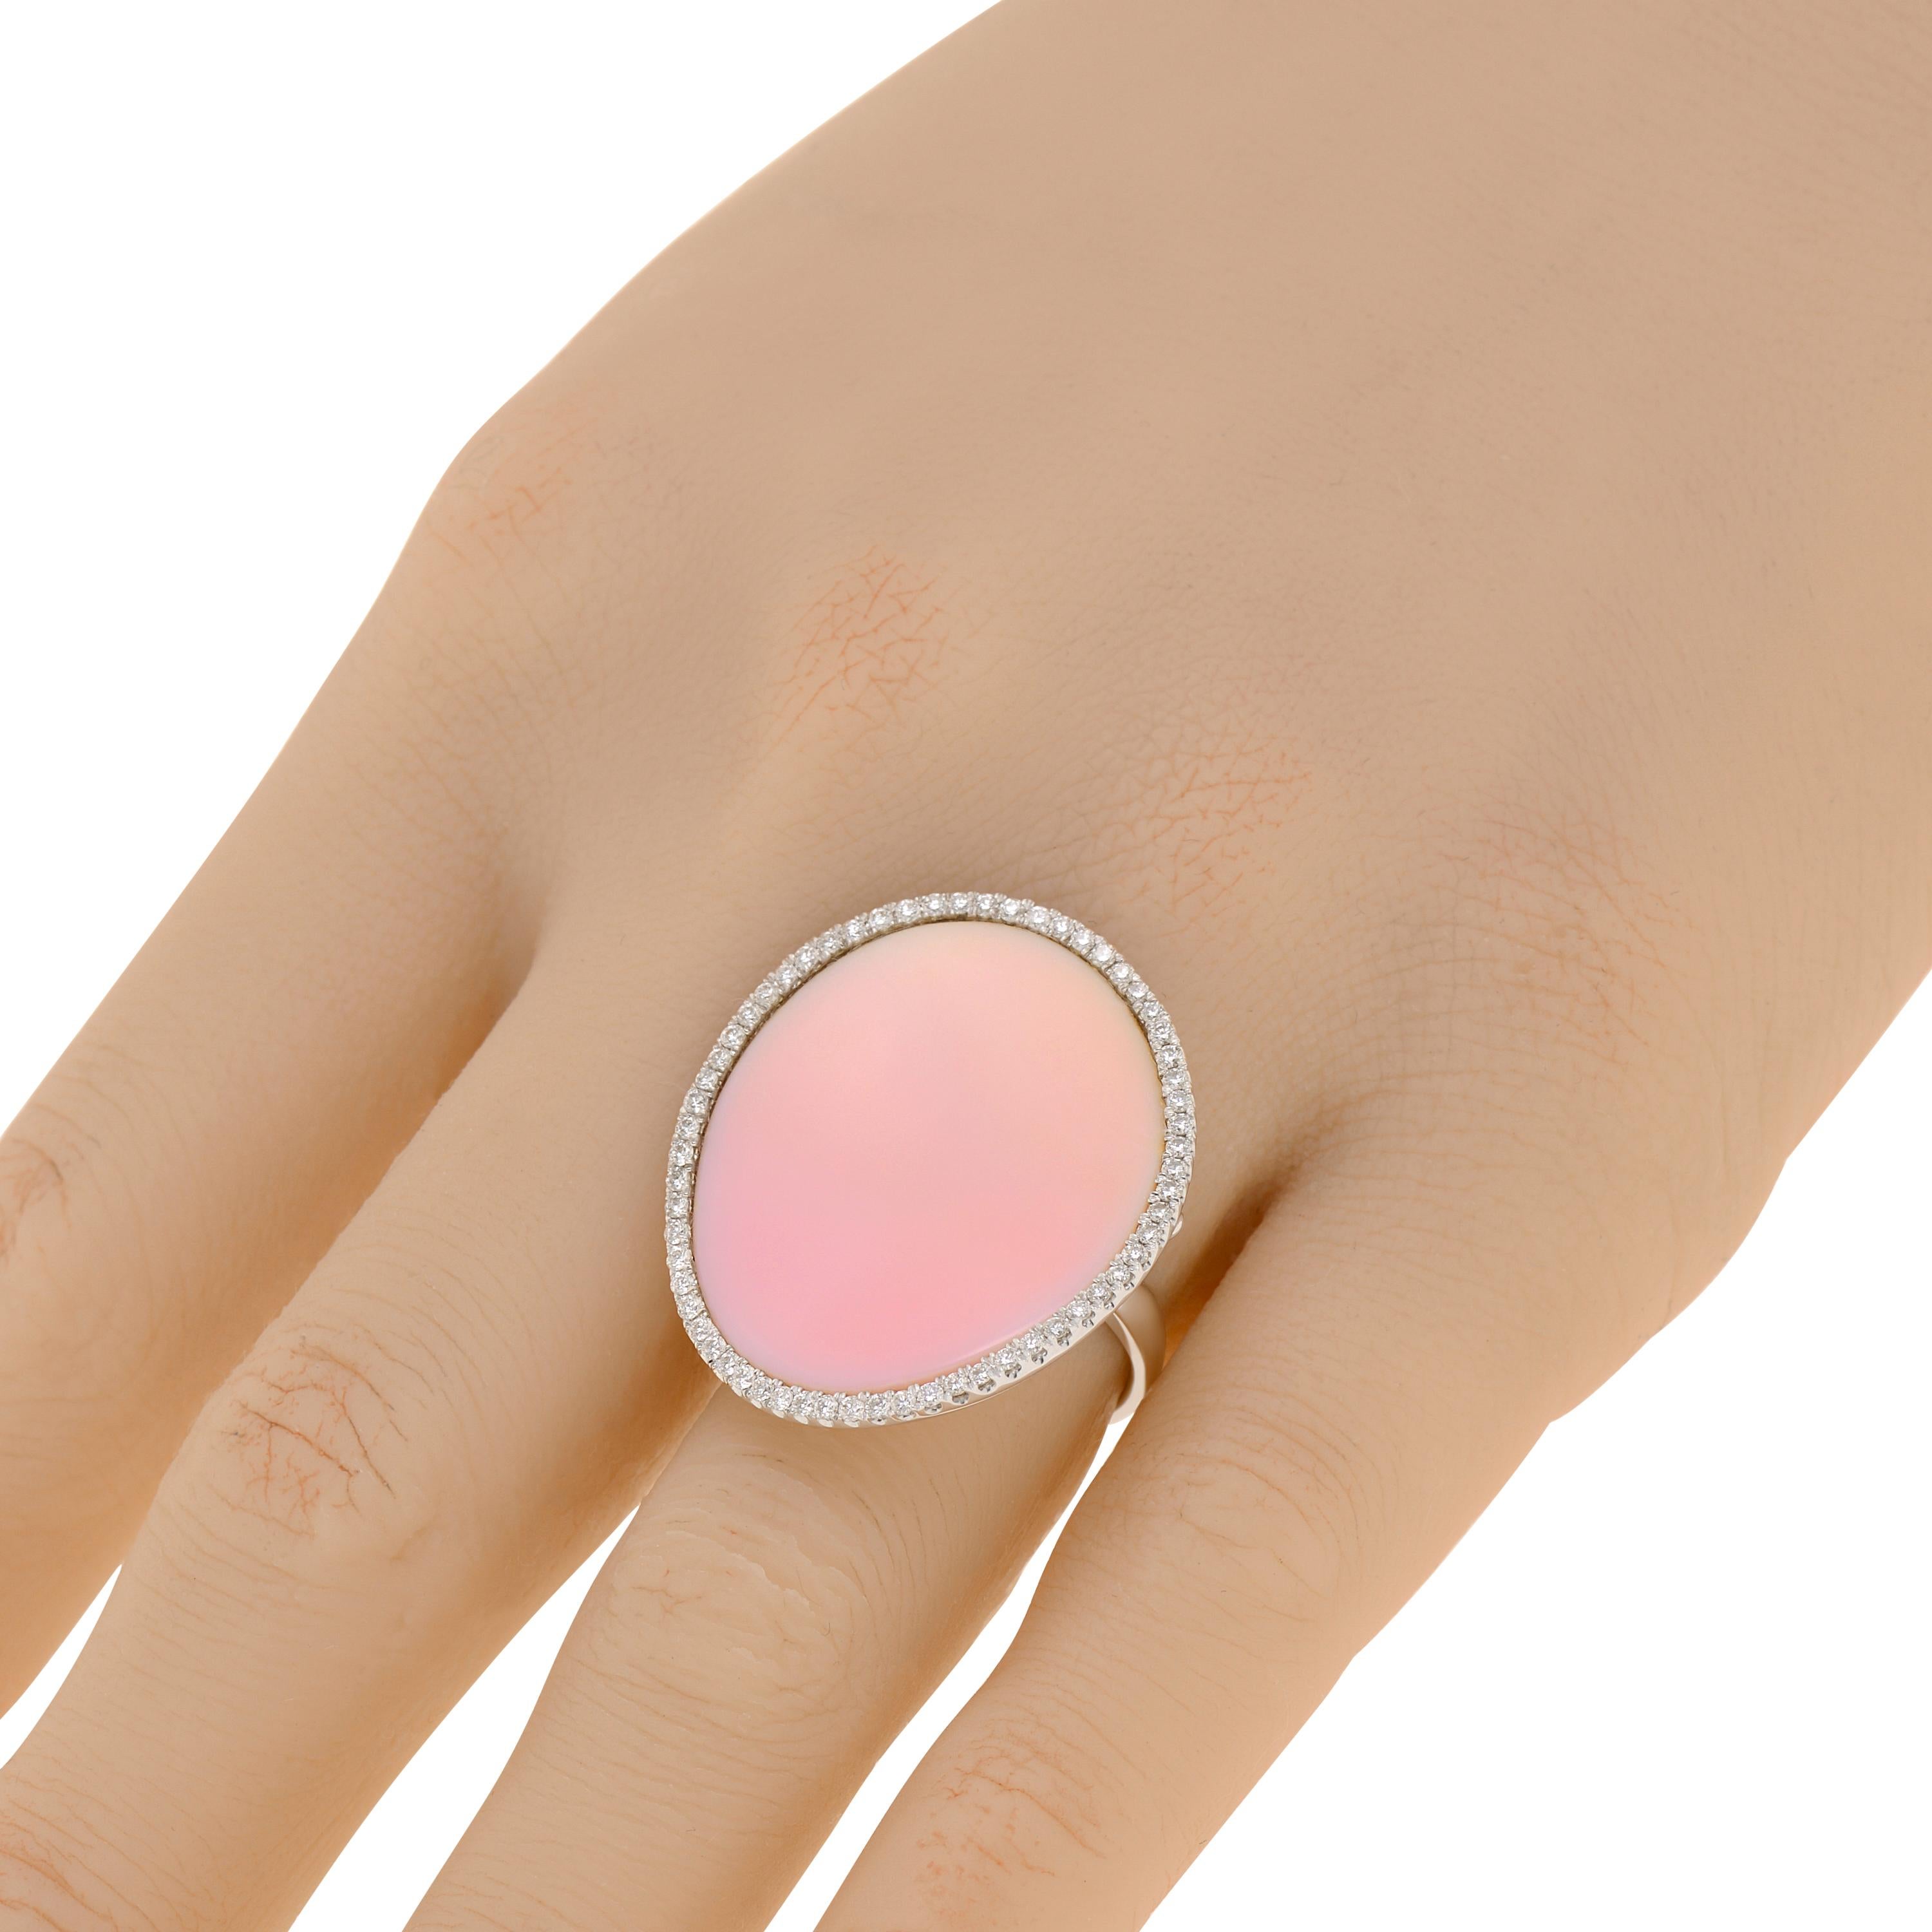 Mimi Milano 18K white gold statement ring features pink Mother of pearl and 0.5ct. tw. diamonds set in 18K rose gold. The ring size is 7.25 (55.1). The decoration size is 1 1/8